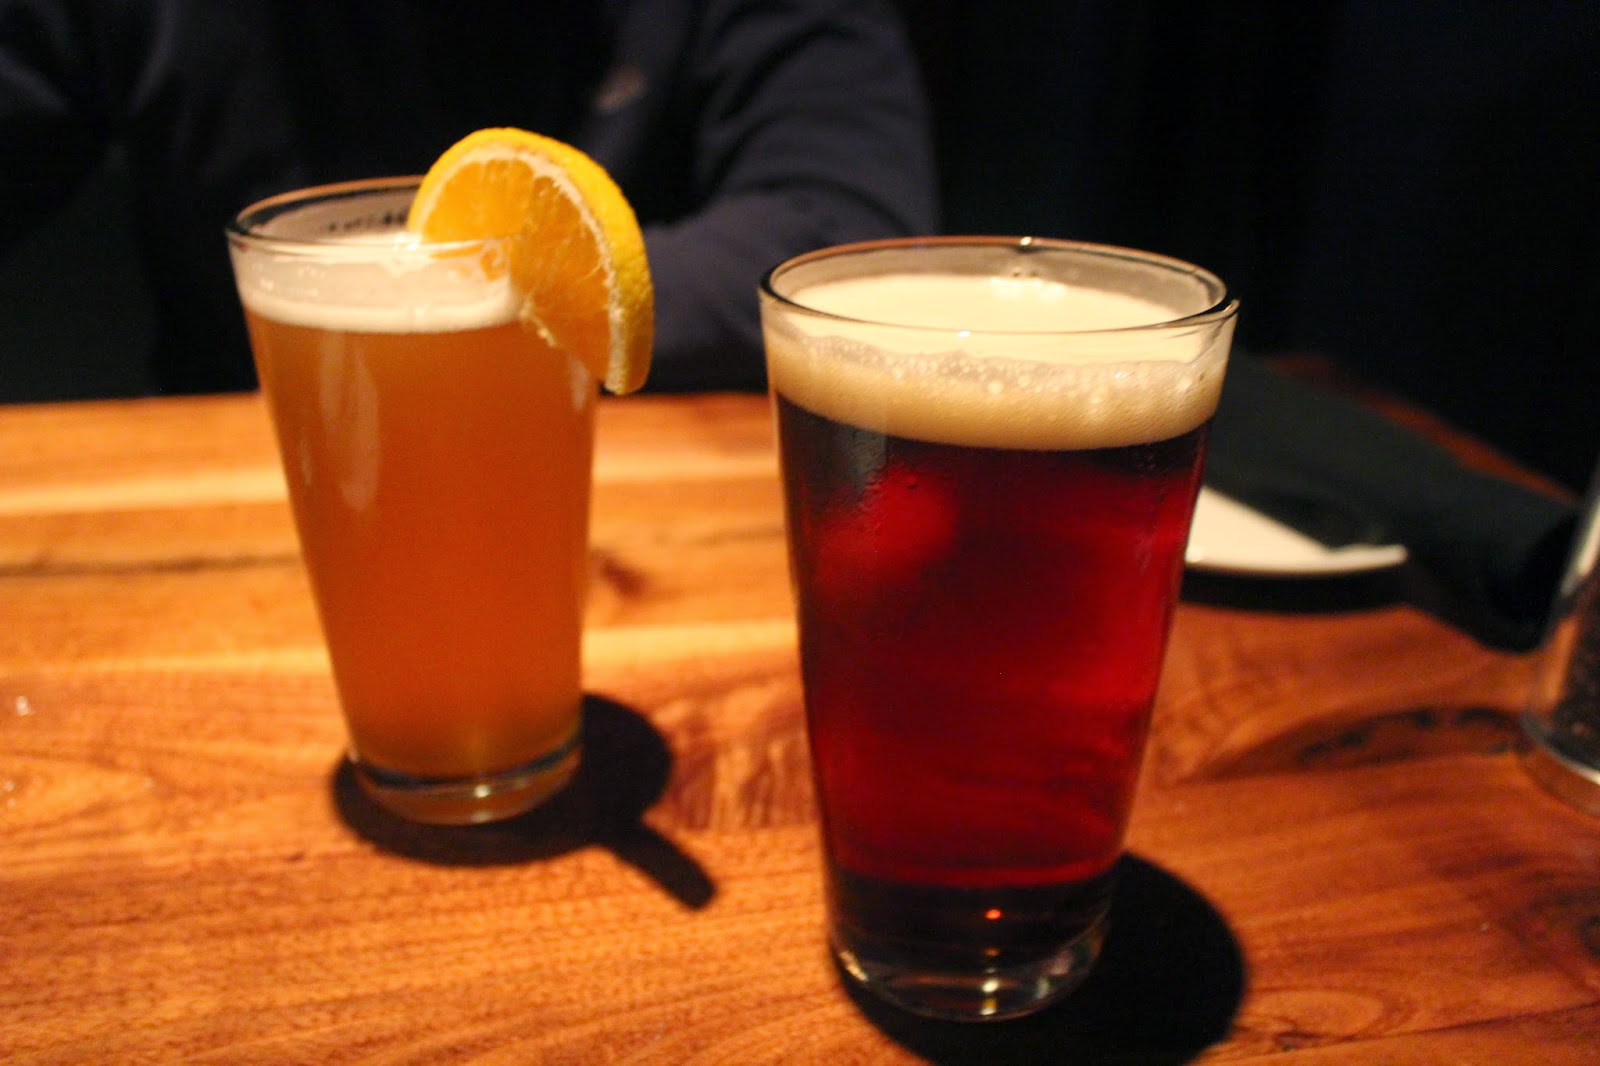 UFO White and Sam Adams OctoberFest at Del Frisco's Grille